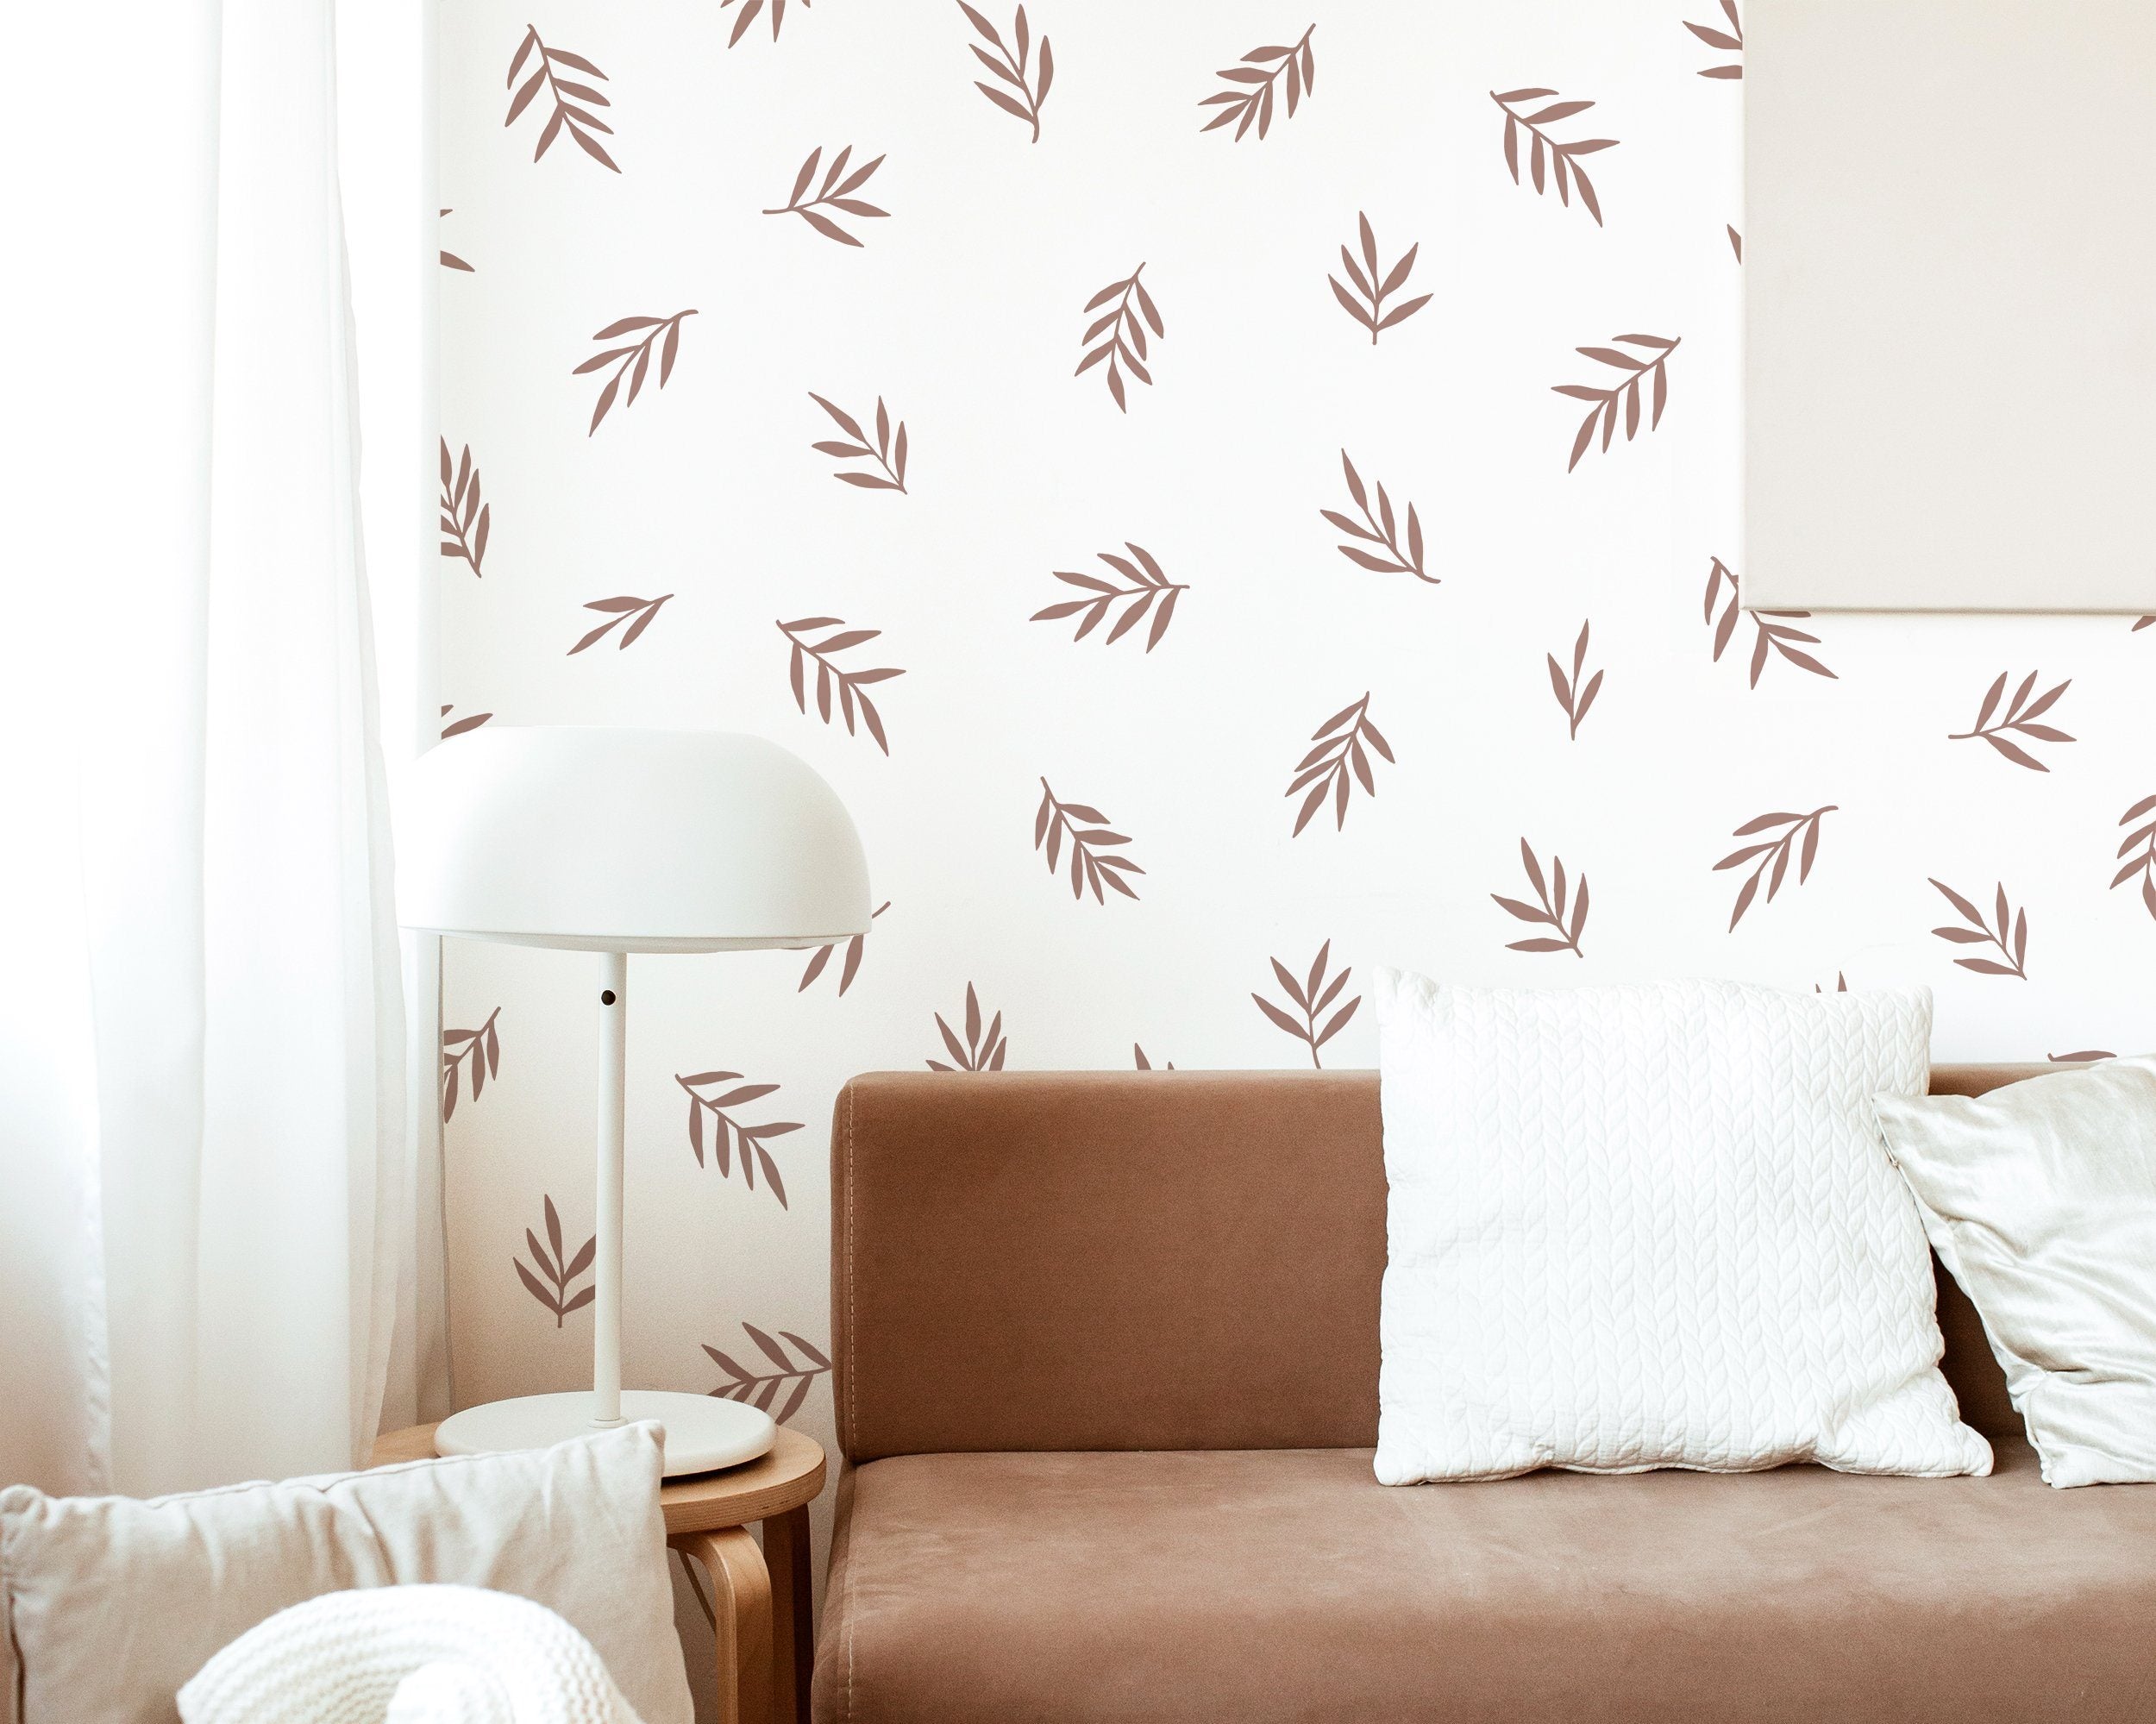 Branches Wall Decal Set - Sample / Espresso